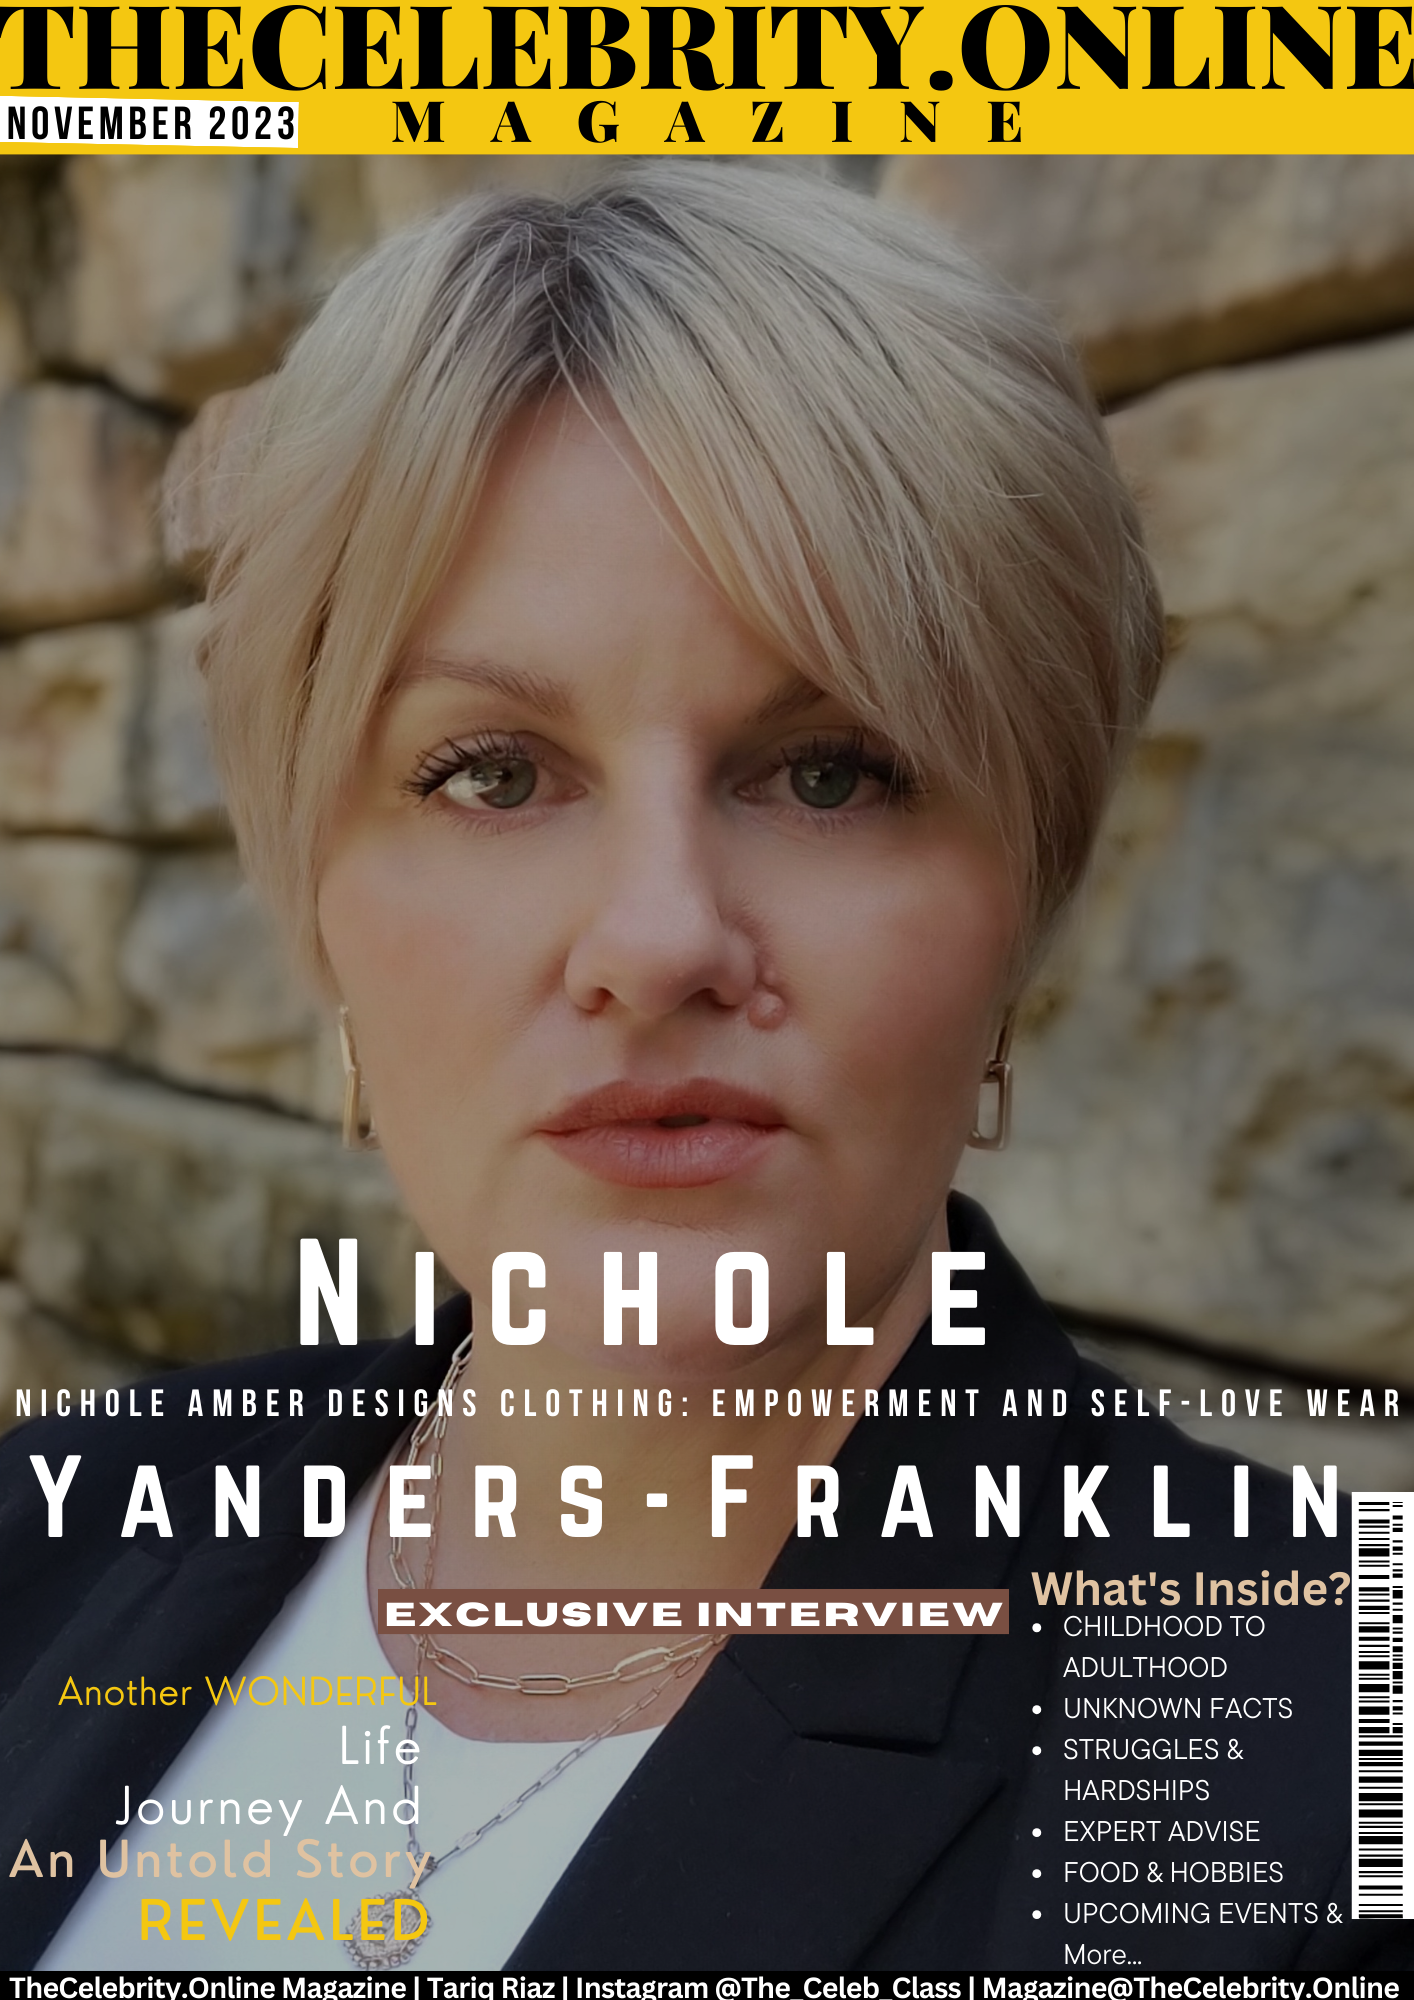 Nichole Amber Designs Clothing: Empowerment and Self-Love Wear – Nichole Yanders-Franklin Exclusive Interview